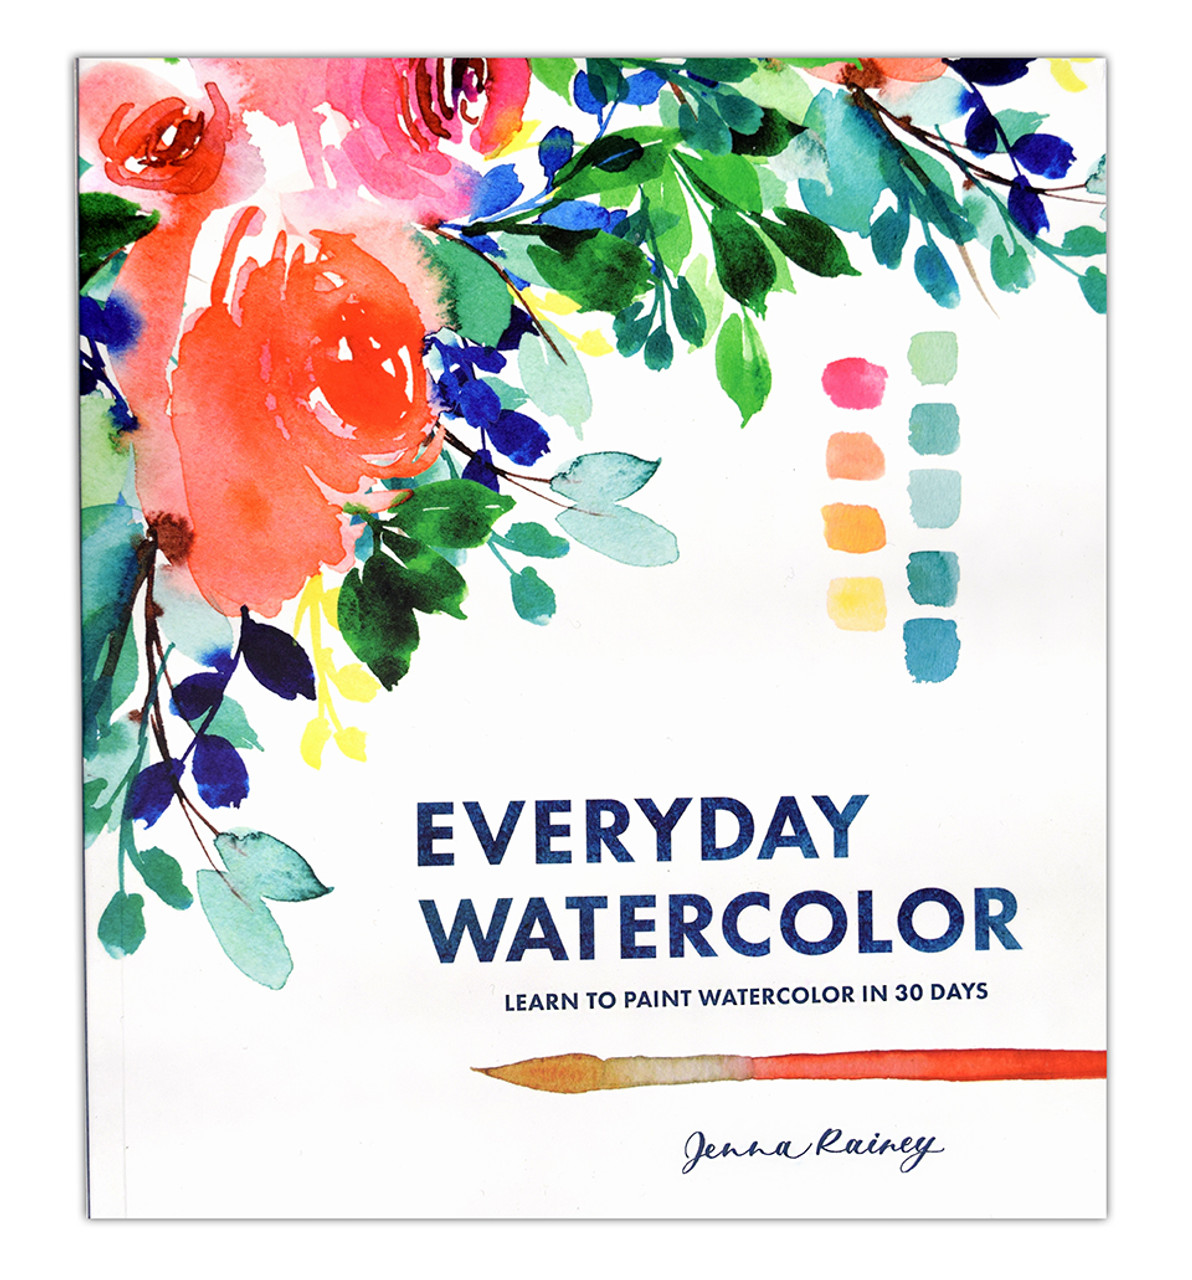 Watercolors for Kids – Tuesday, 1/23 at 3:30 (Signup Required